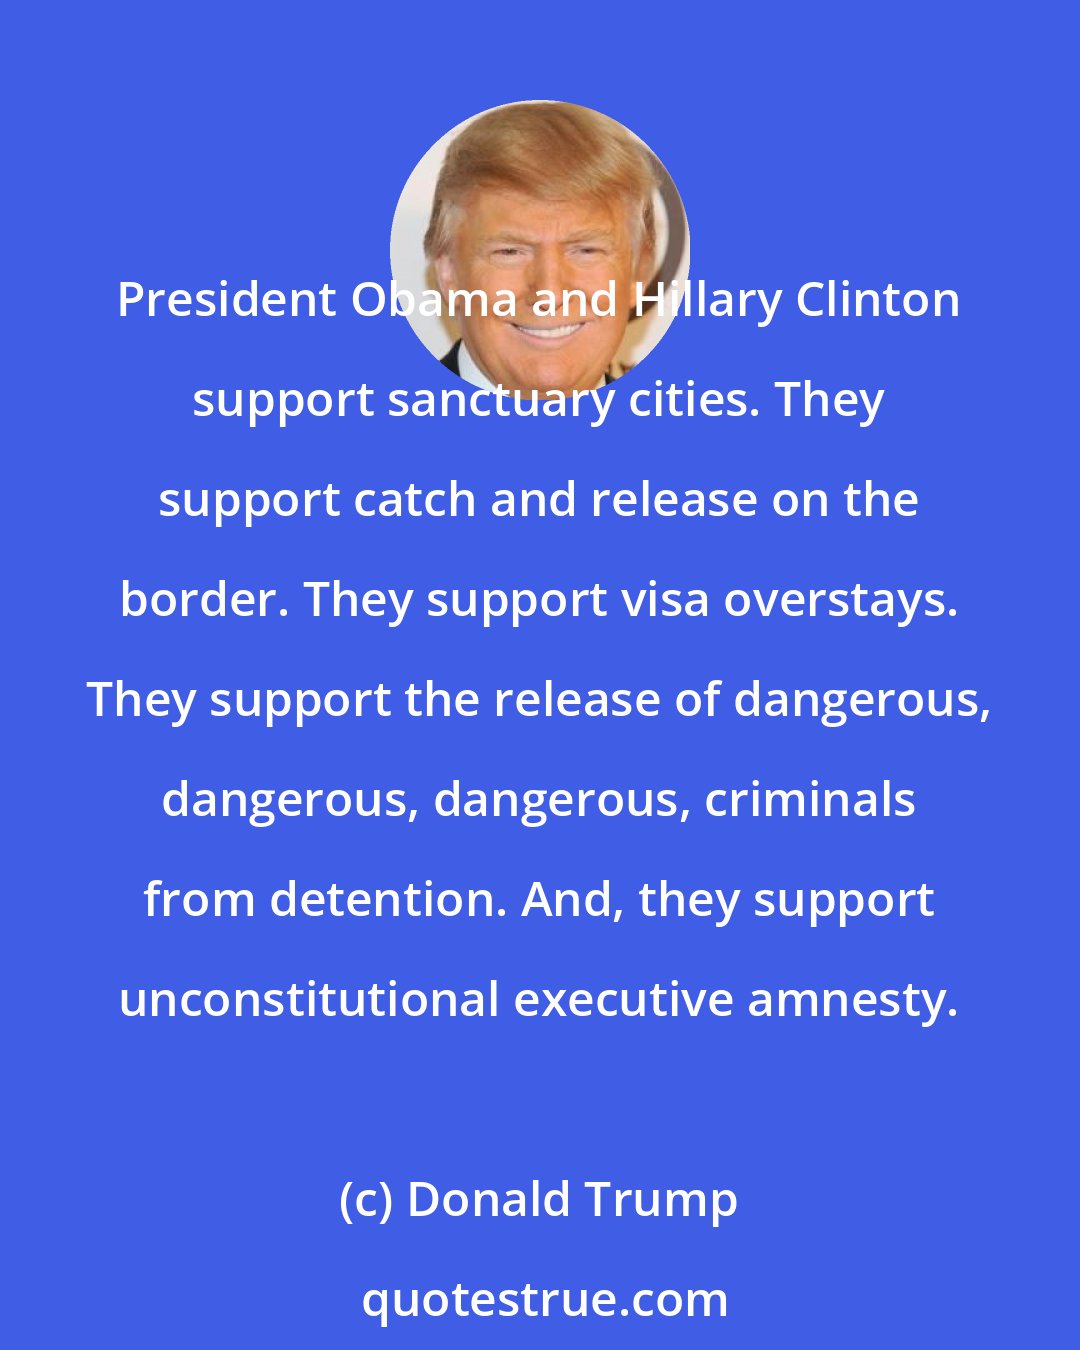 Donald Trump: President Obama and Hillary Clinton support sanctuary cities. They support catch and release on the border. They support visa overstays. They support the release of dangerous, dangerous, dangerous, criminals from detention. And, they support unconstitutional executive amnesty.